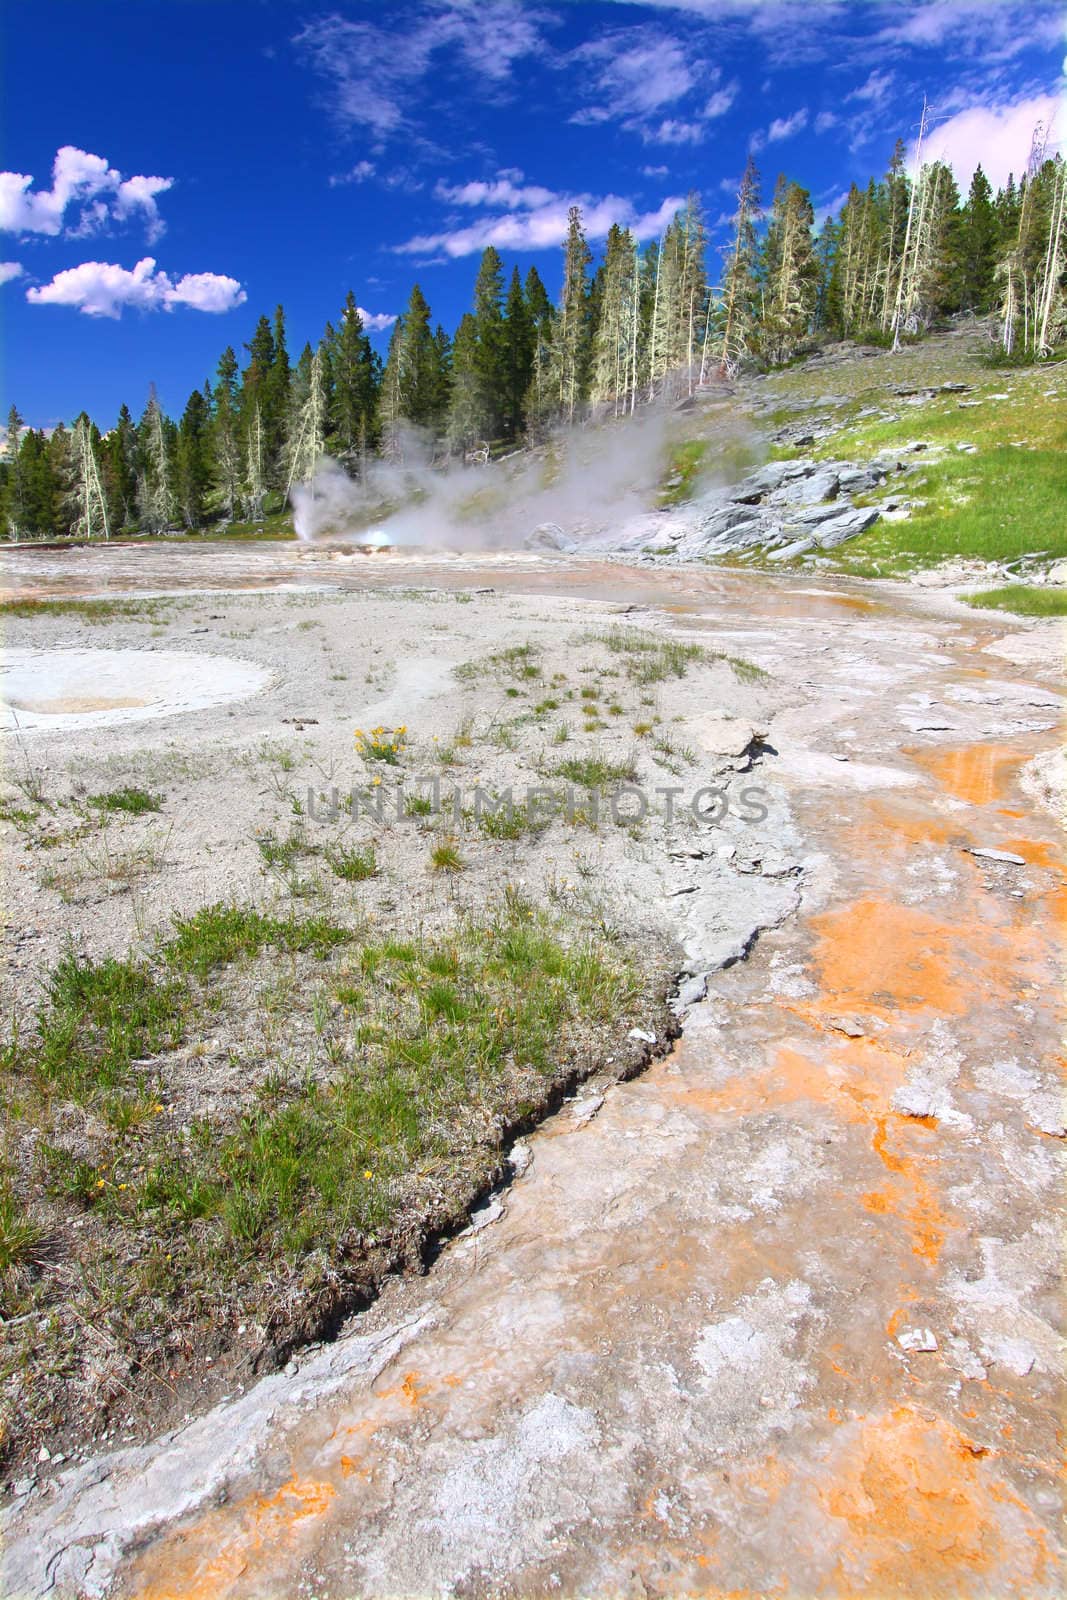 View of the thermal features near Grand Geyser of Yellowstone National Park.